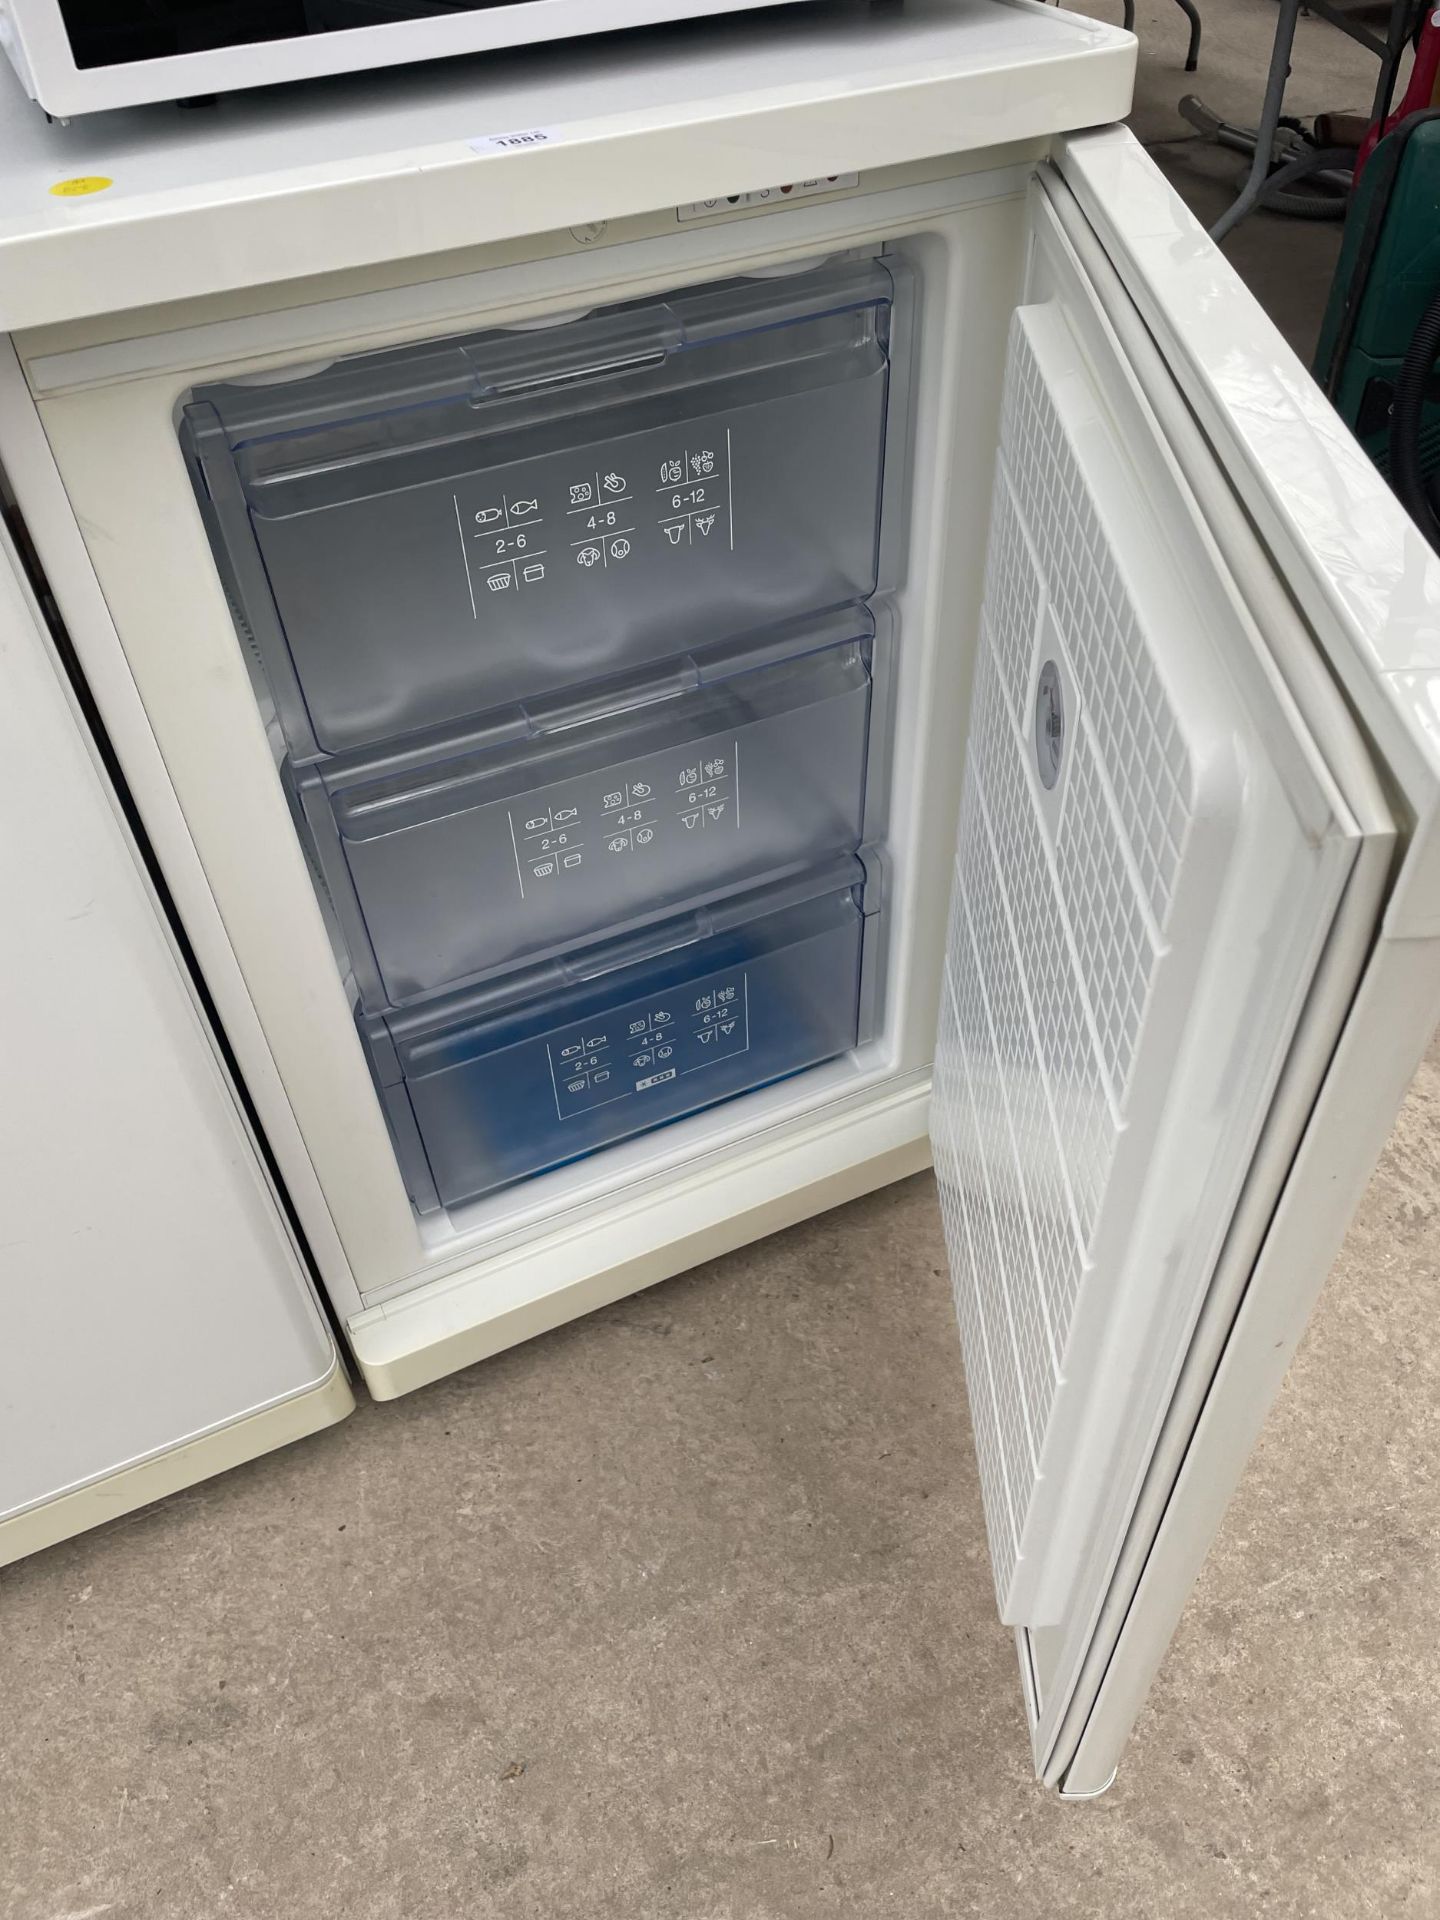 A WHITE BOSCH EXXCEL UNDERCOUNTER FREEZER - Image 2 of 2